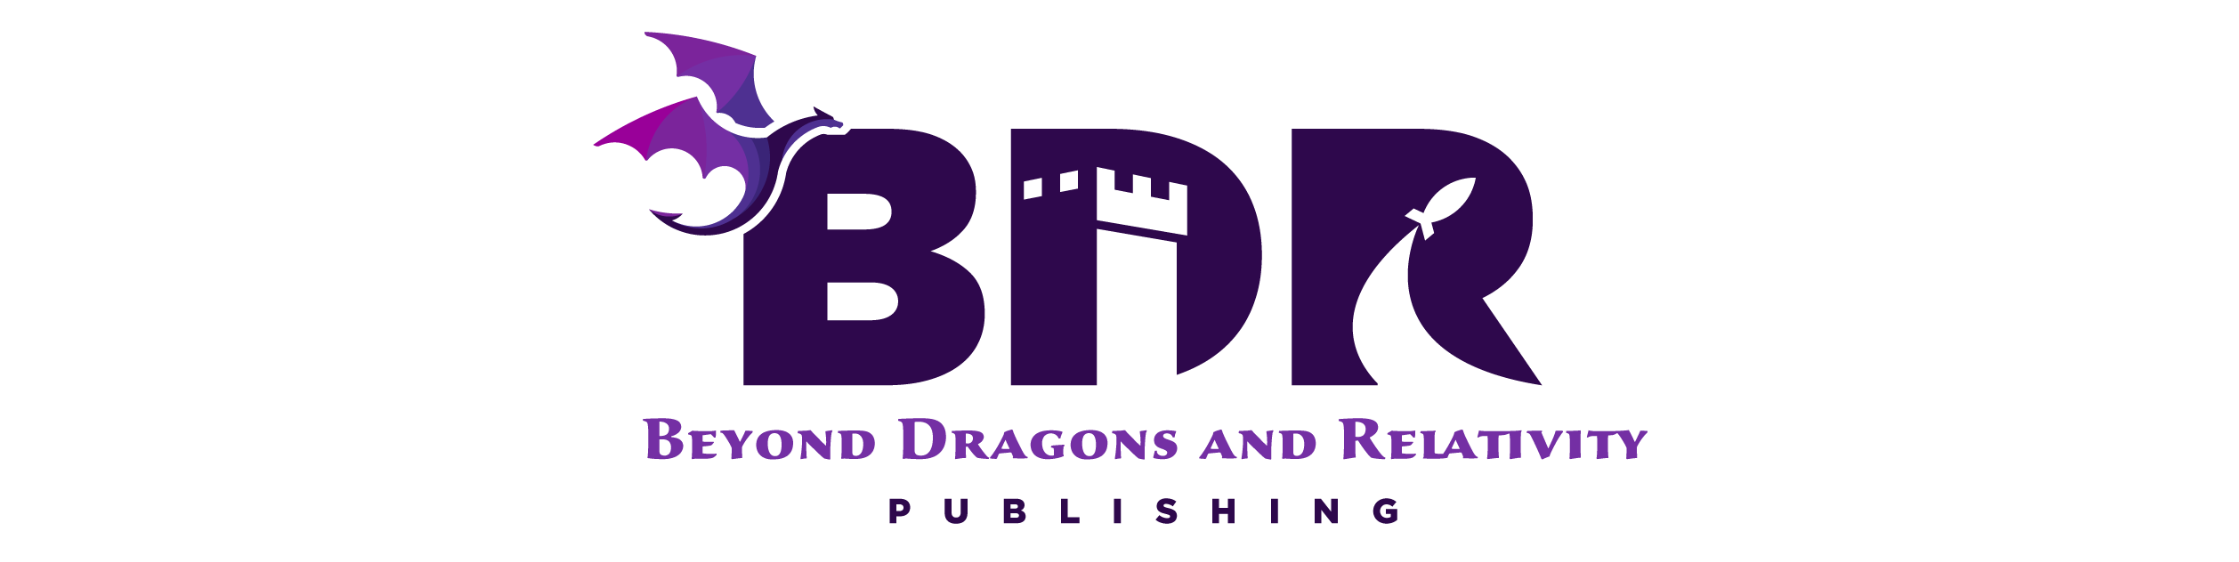 BDR Publishing-The Literary vault by Cyra